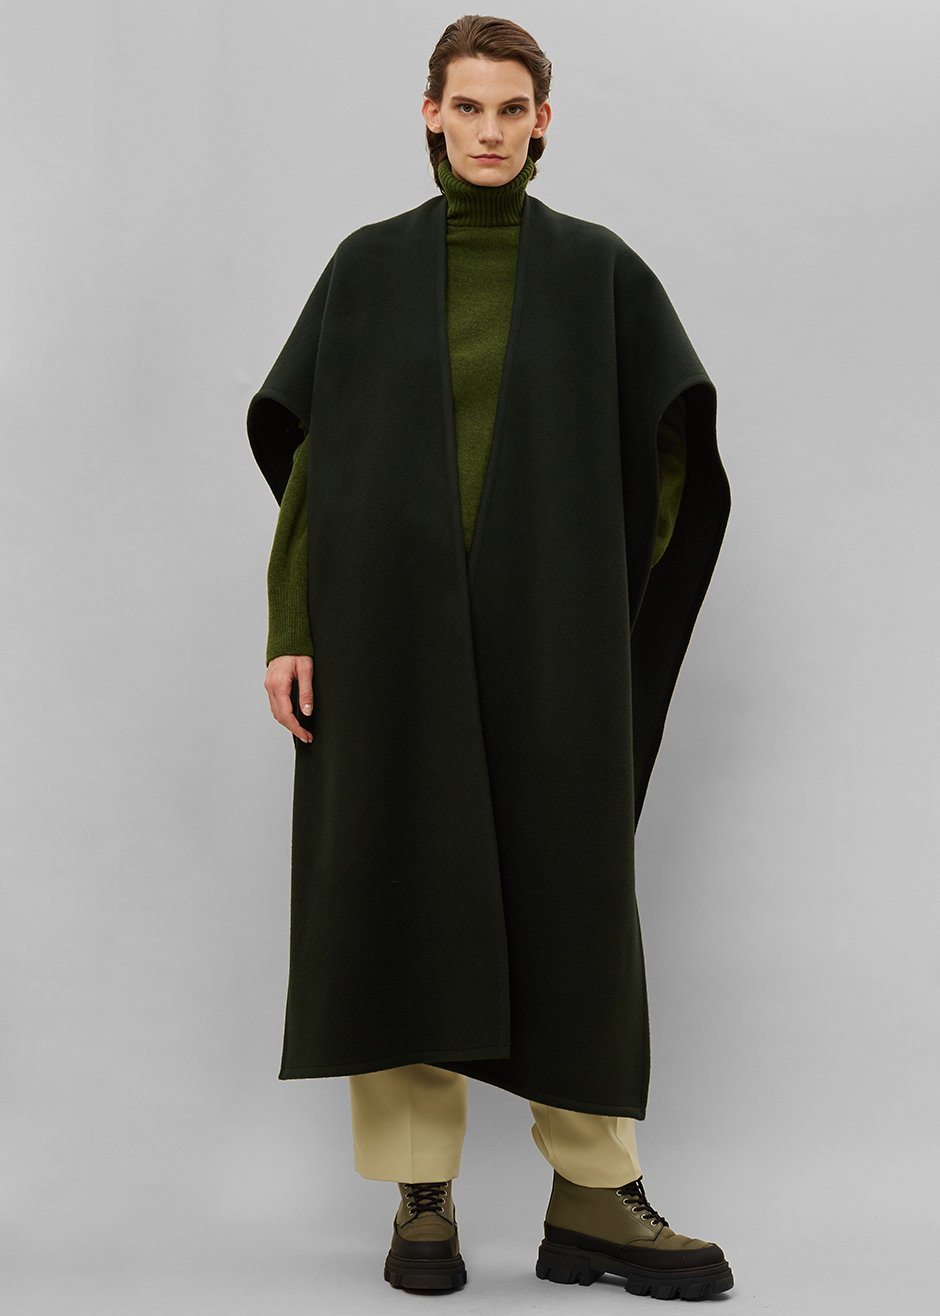 Verina Cape - Forest Green - 1